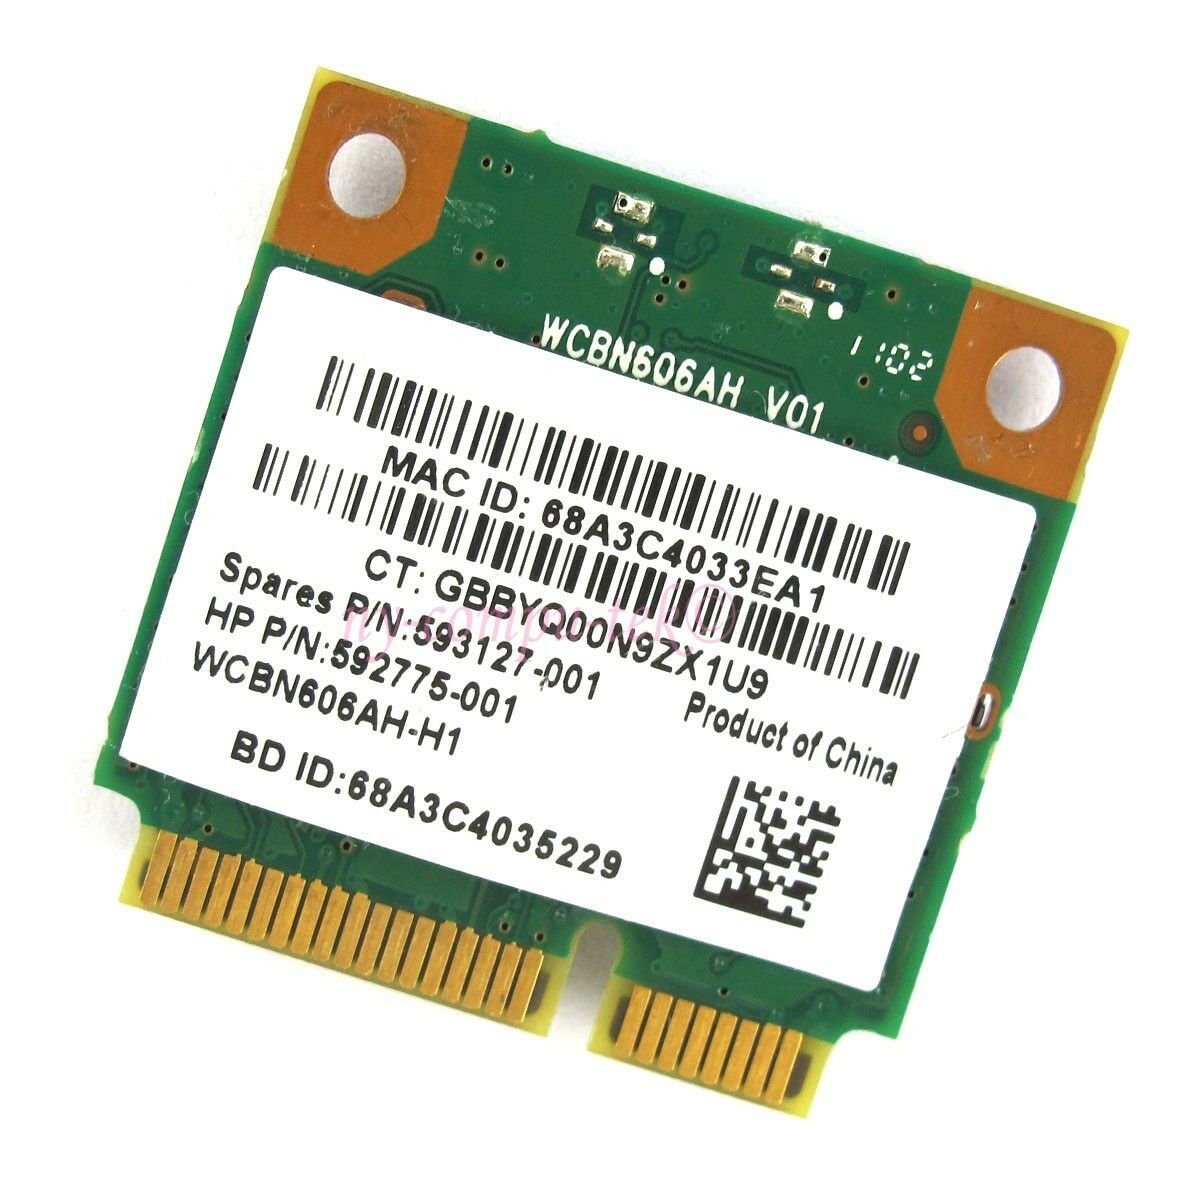 atheros ar9285 specifications